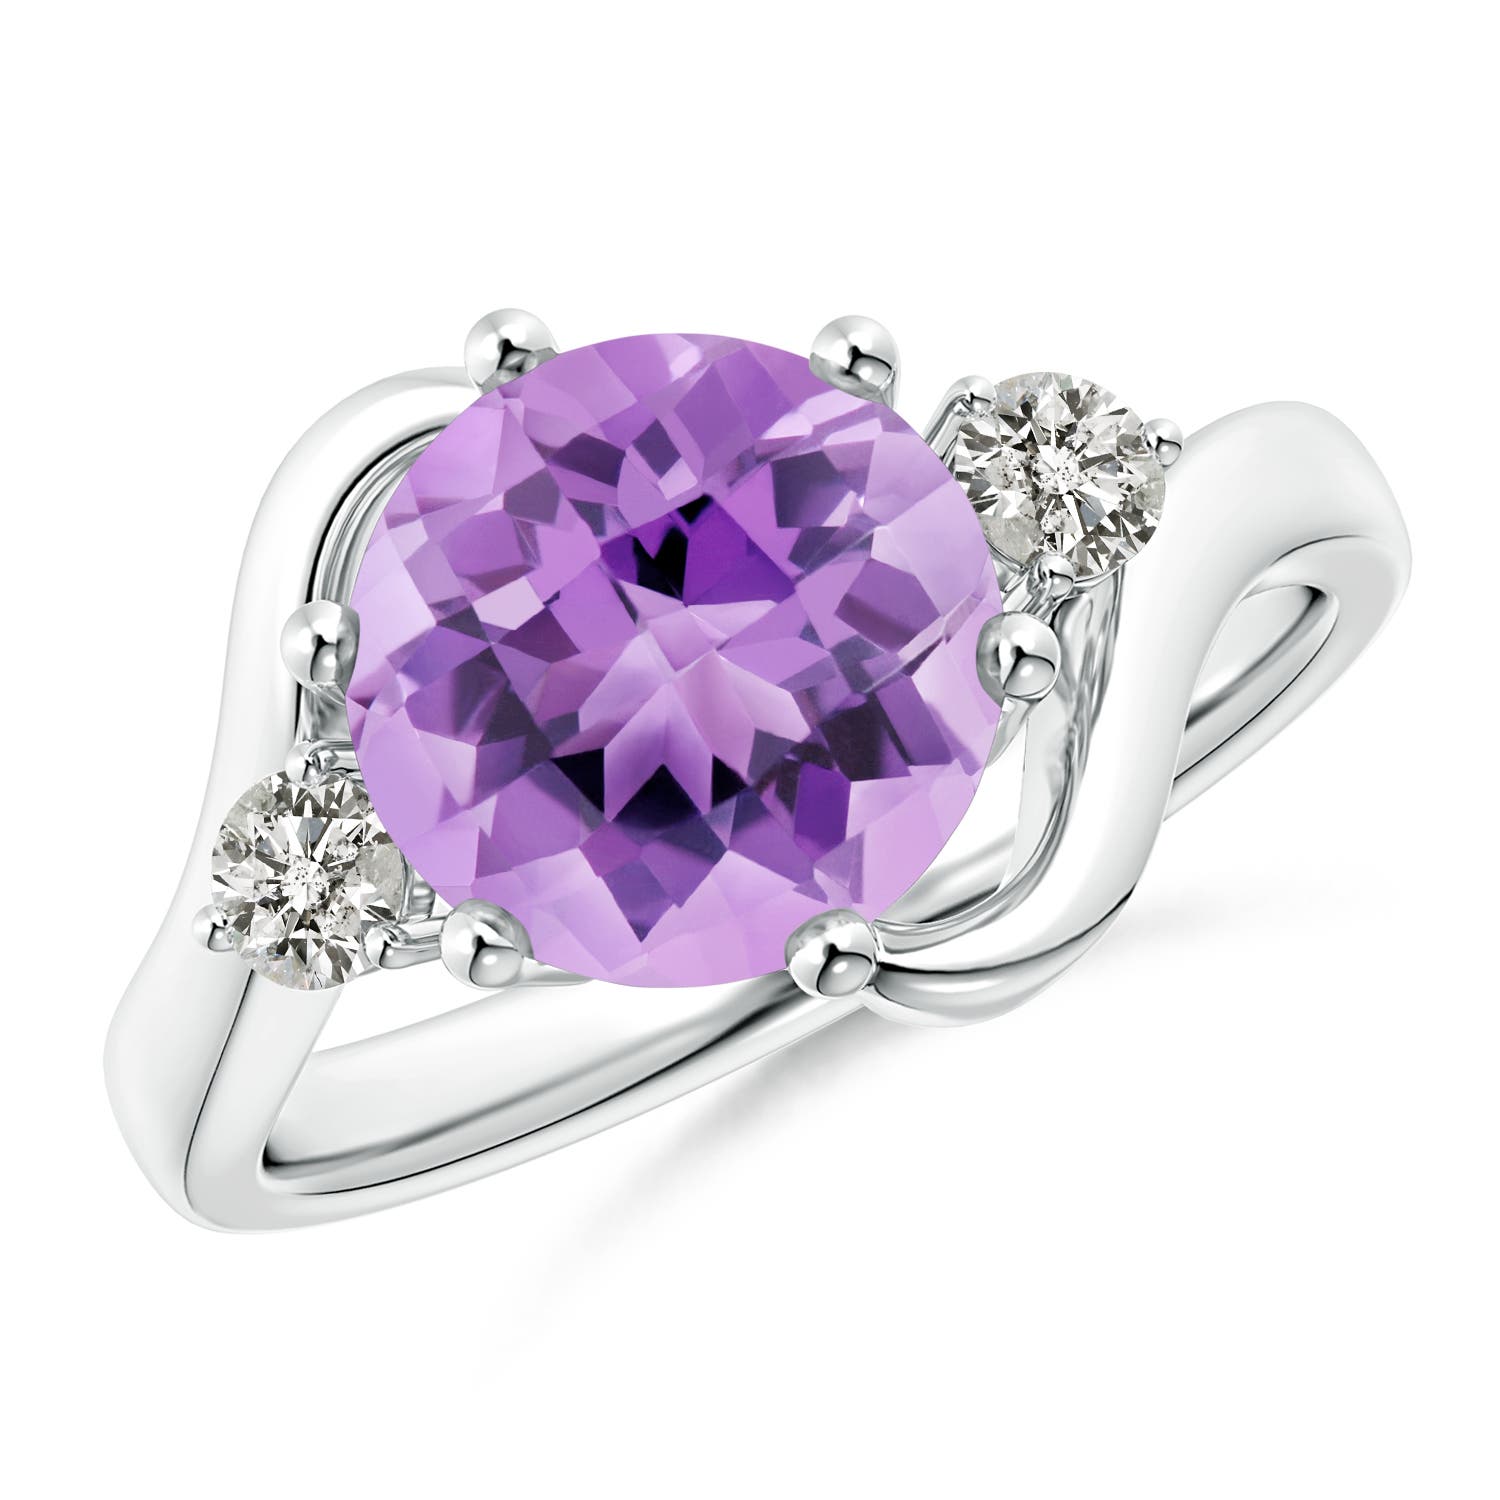 A - Amethyst / 2.31 CT / 14 KT White Gold